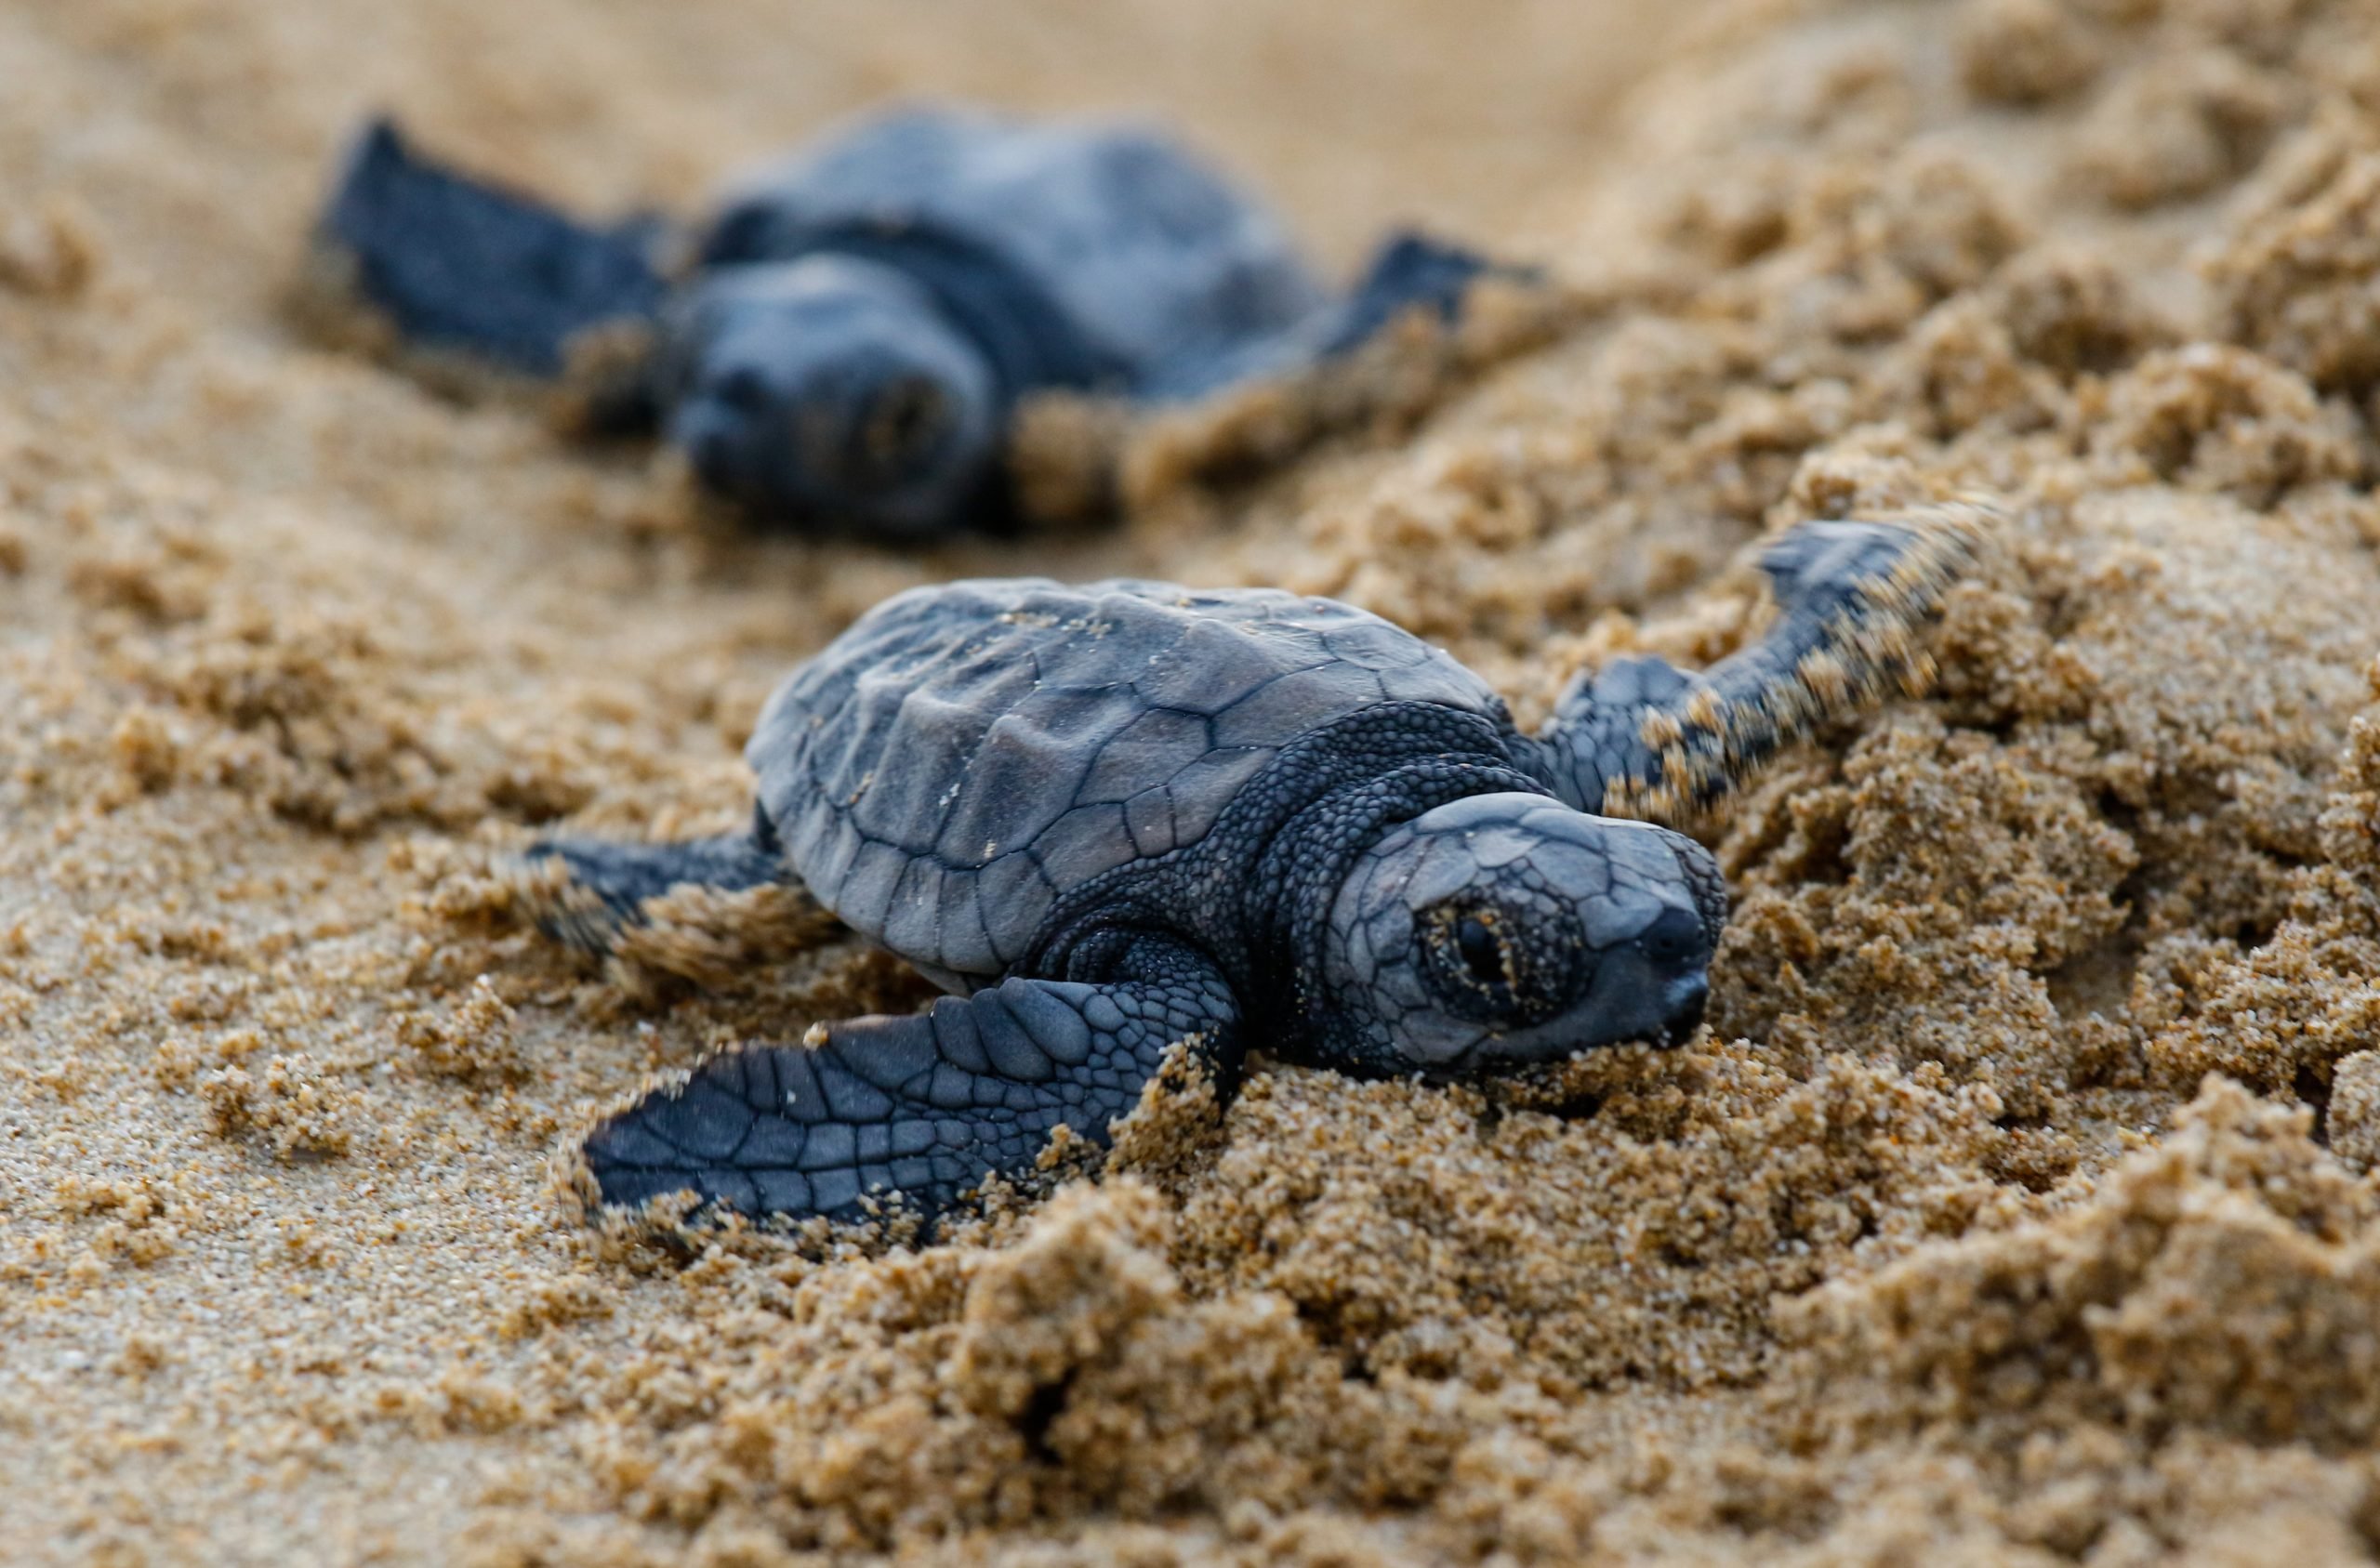 Adorable Picture of Baby Turtles